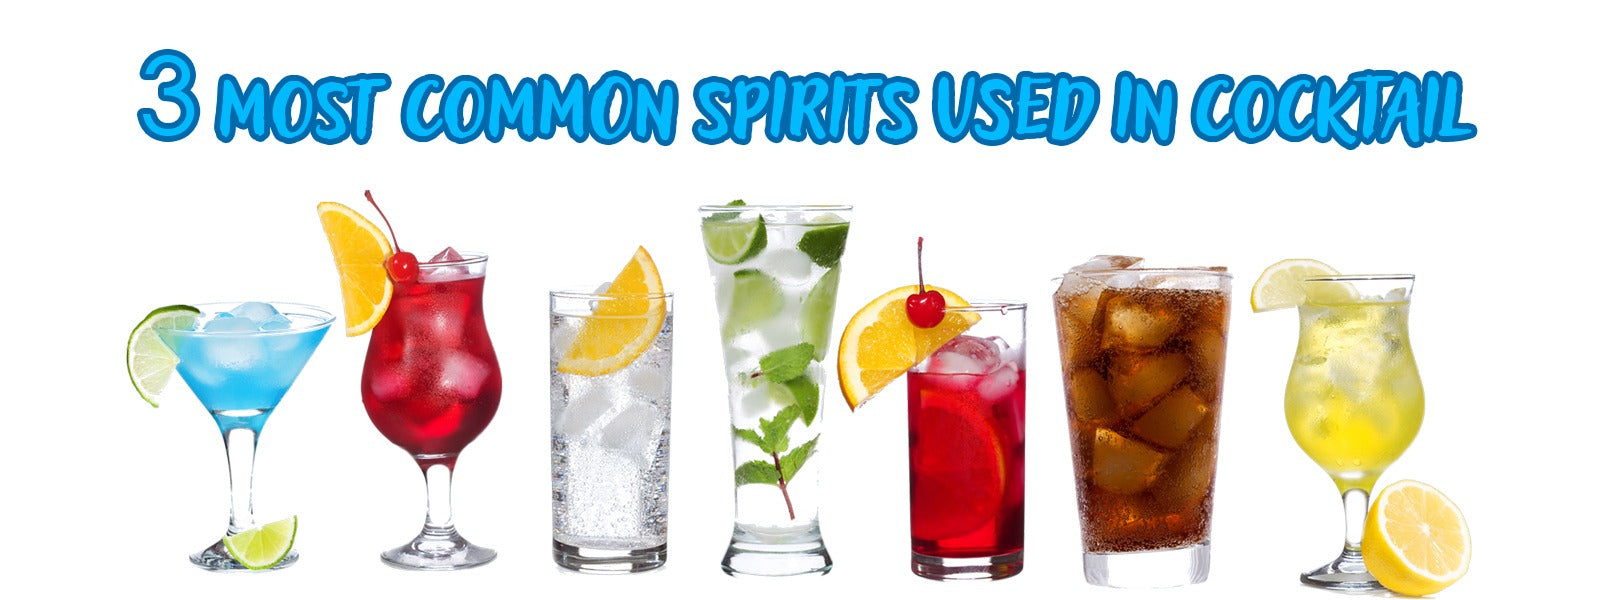 3 most common spirits used in cocktail